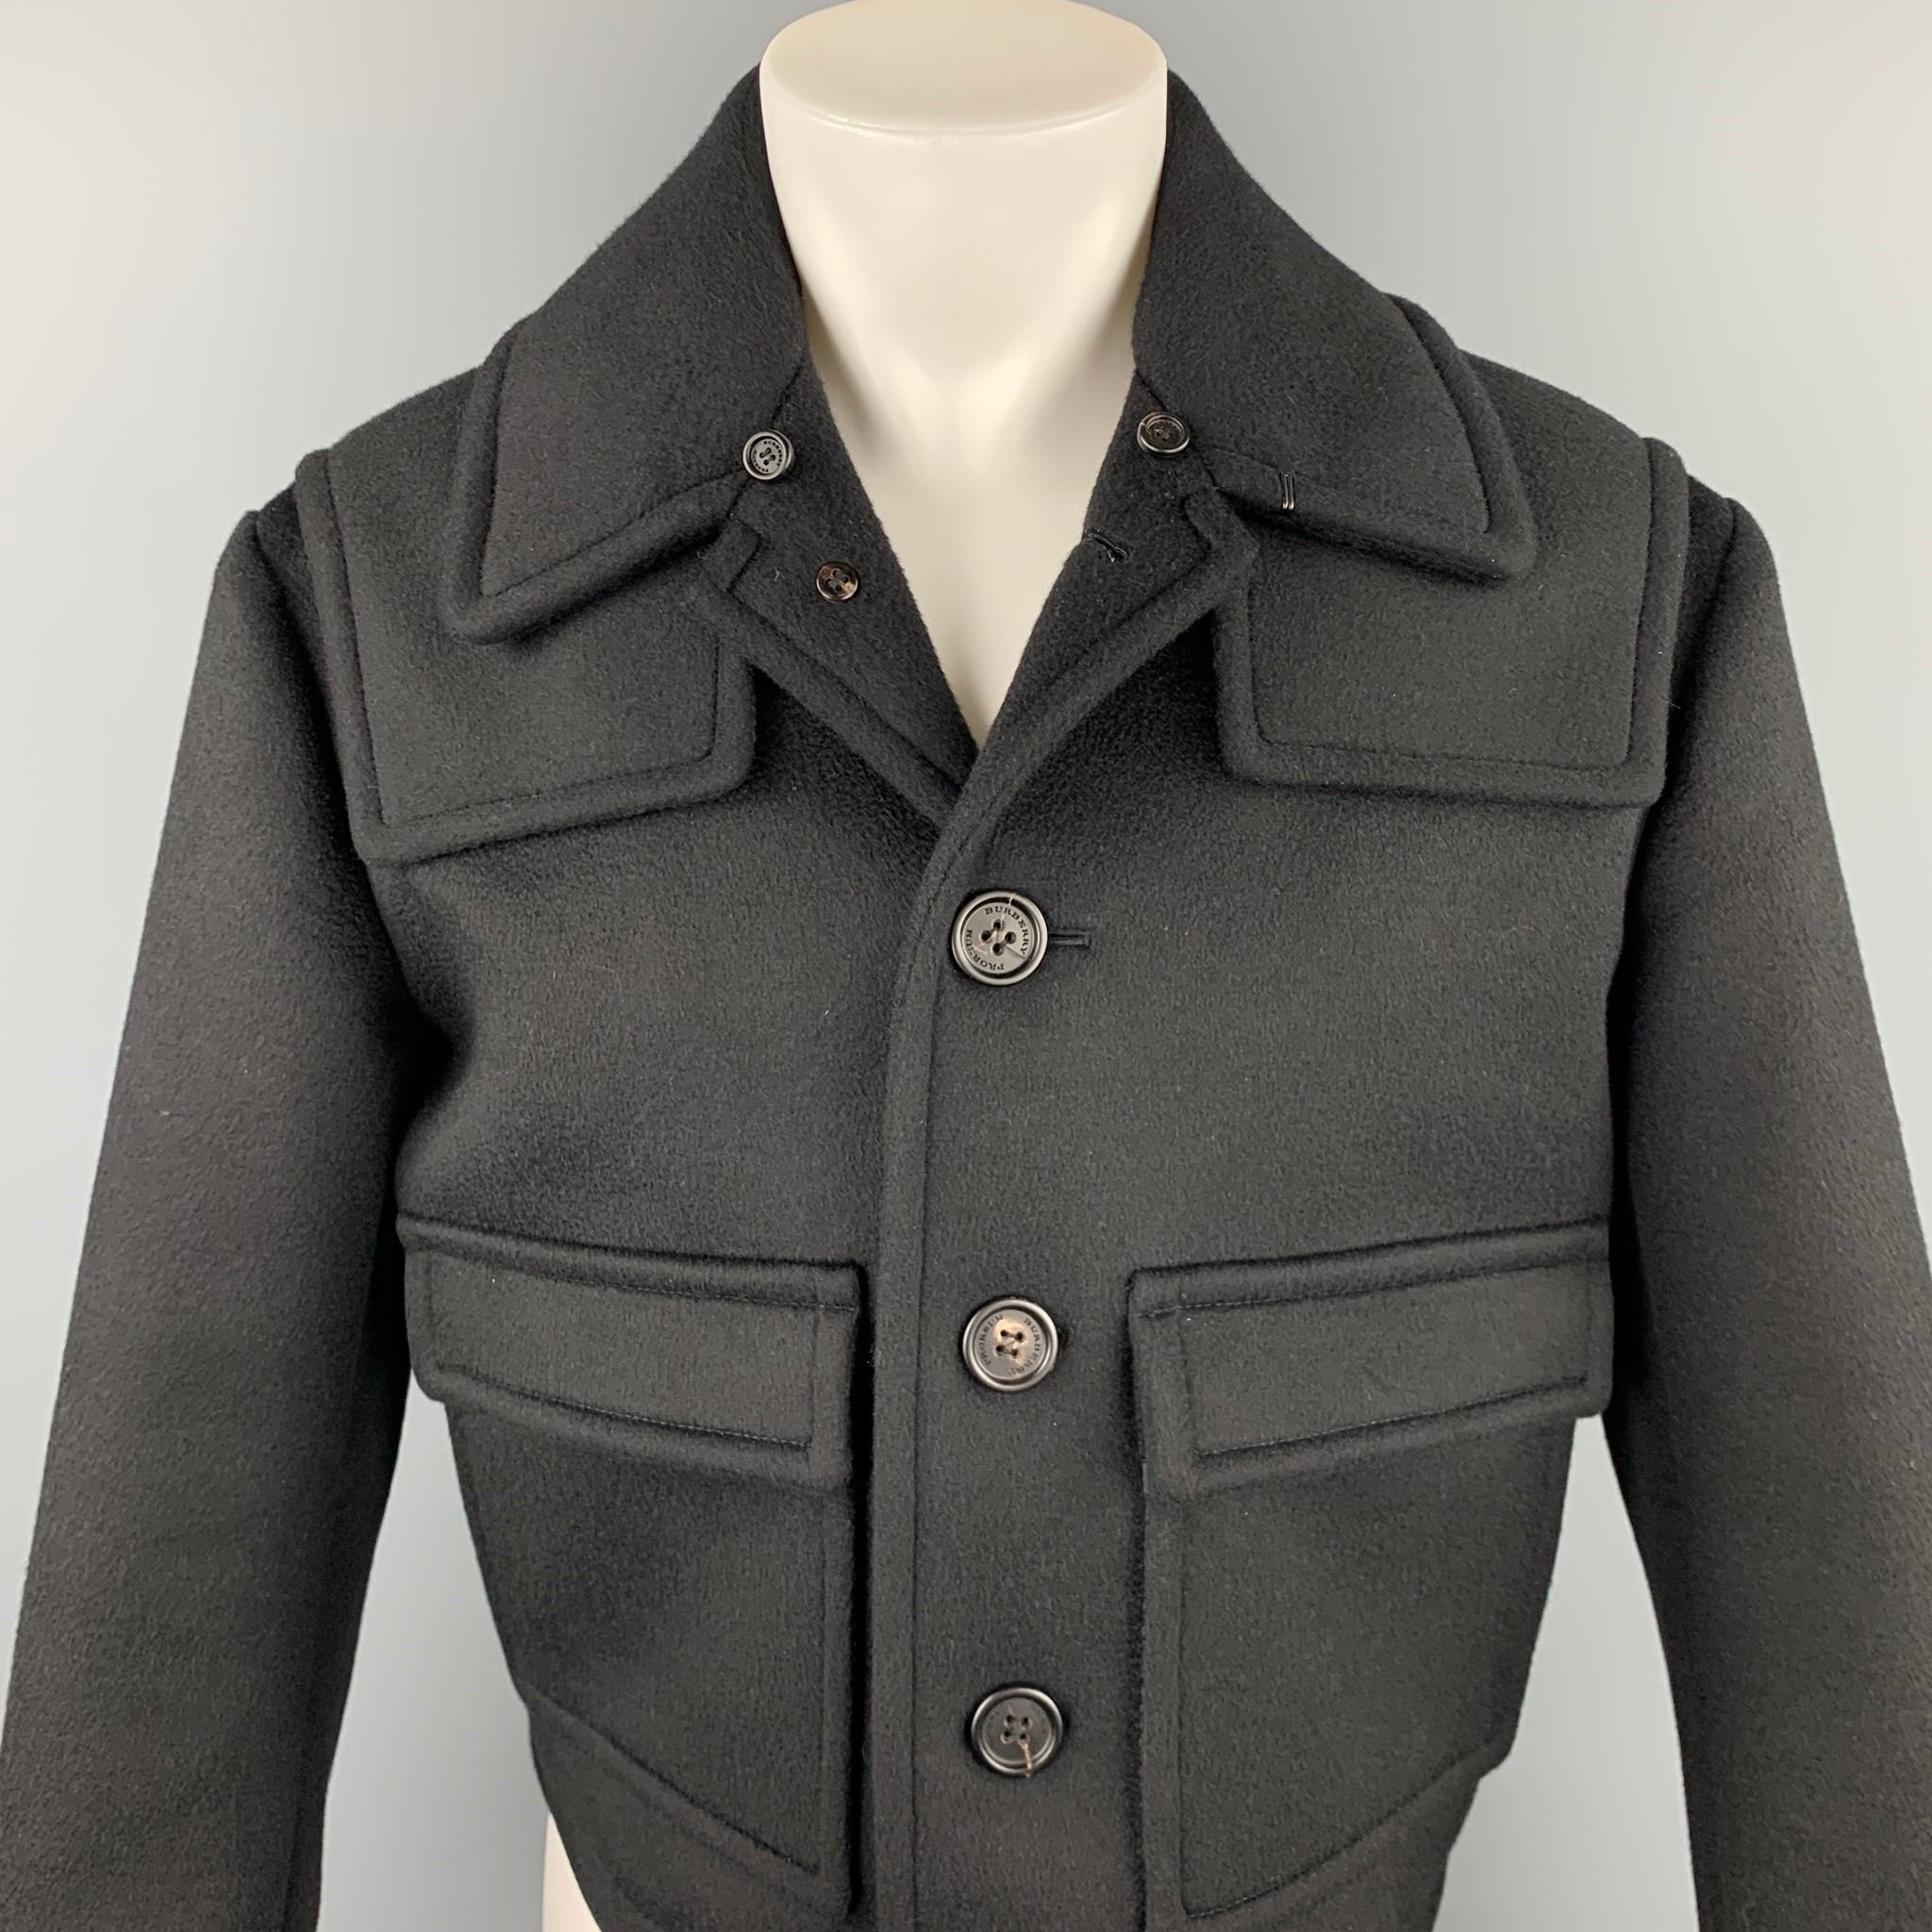 BURBERRY PRORSUM jacket comes in a black cashmere blend with a full monogram print liner featuring a cropped style, patch pockets, and a buttoned closure. Made in Italy.

Excellent Pre-Owned Condition.
Marked: IT 48

Measurements:

Shoulder: 20